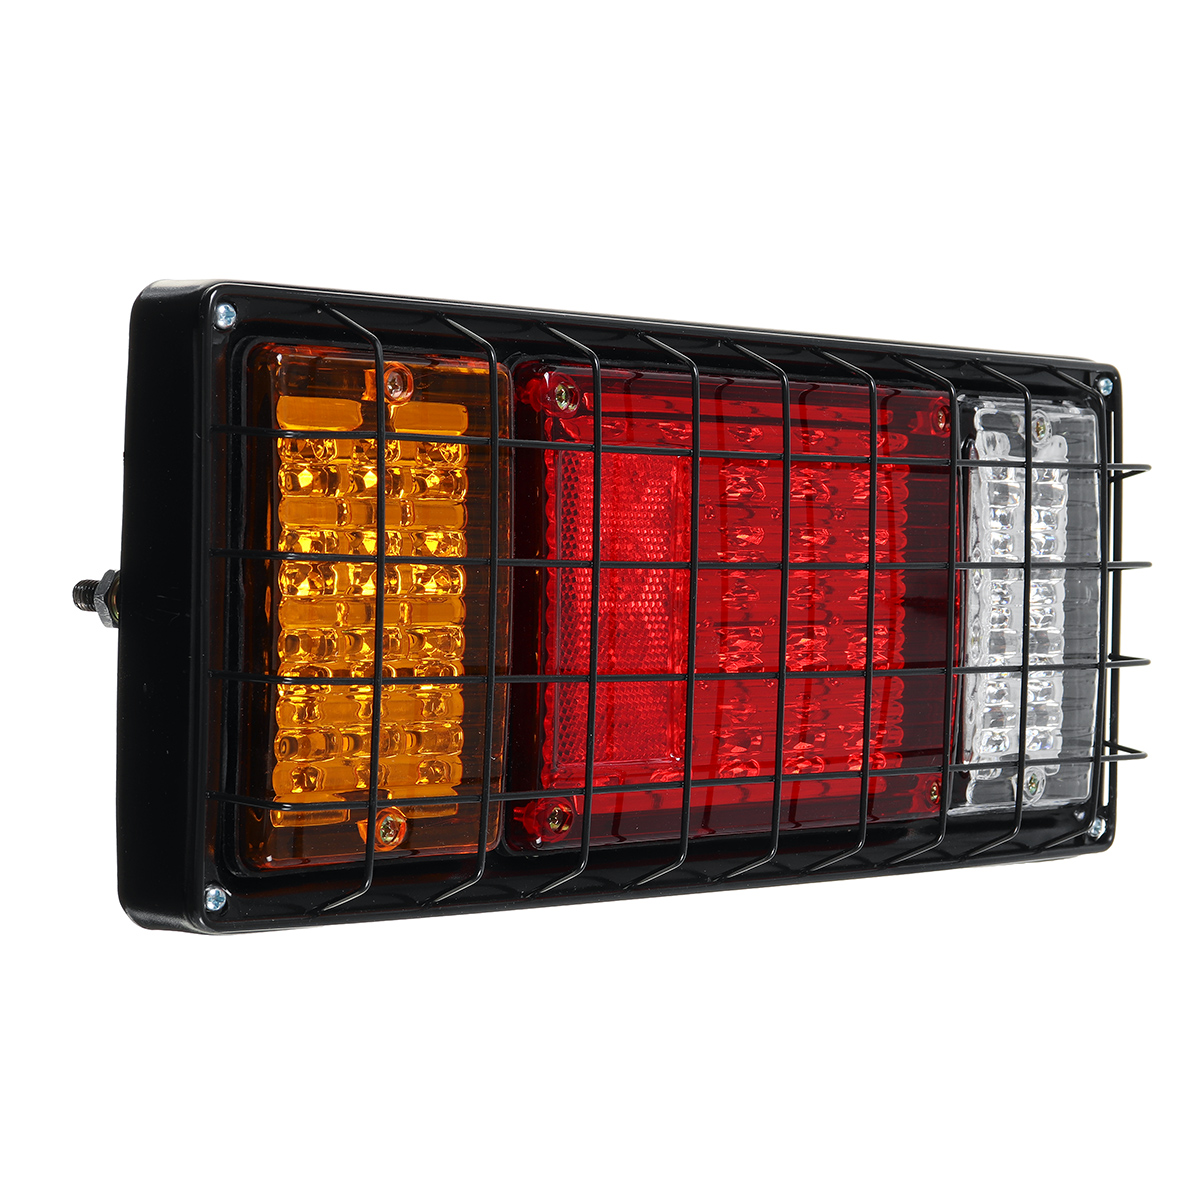 2Pcs 12V 40 LED Tail Lights Replacement Lamp Red Yellow White for Trailer Caravan Truck Boat